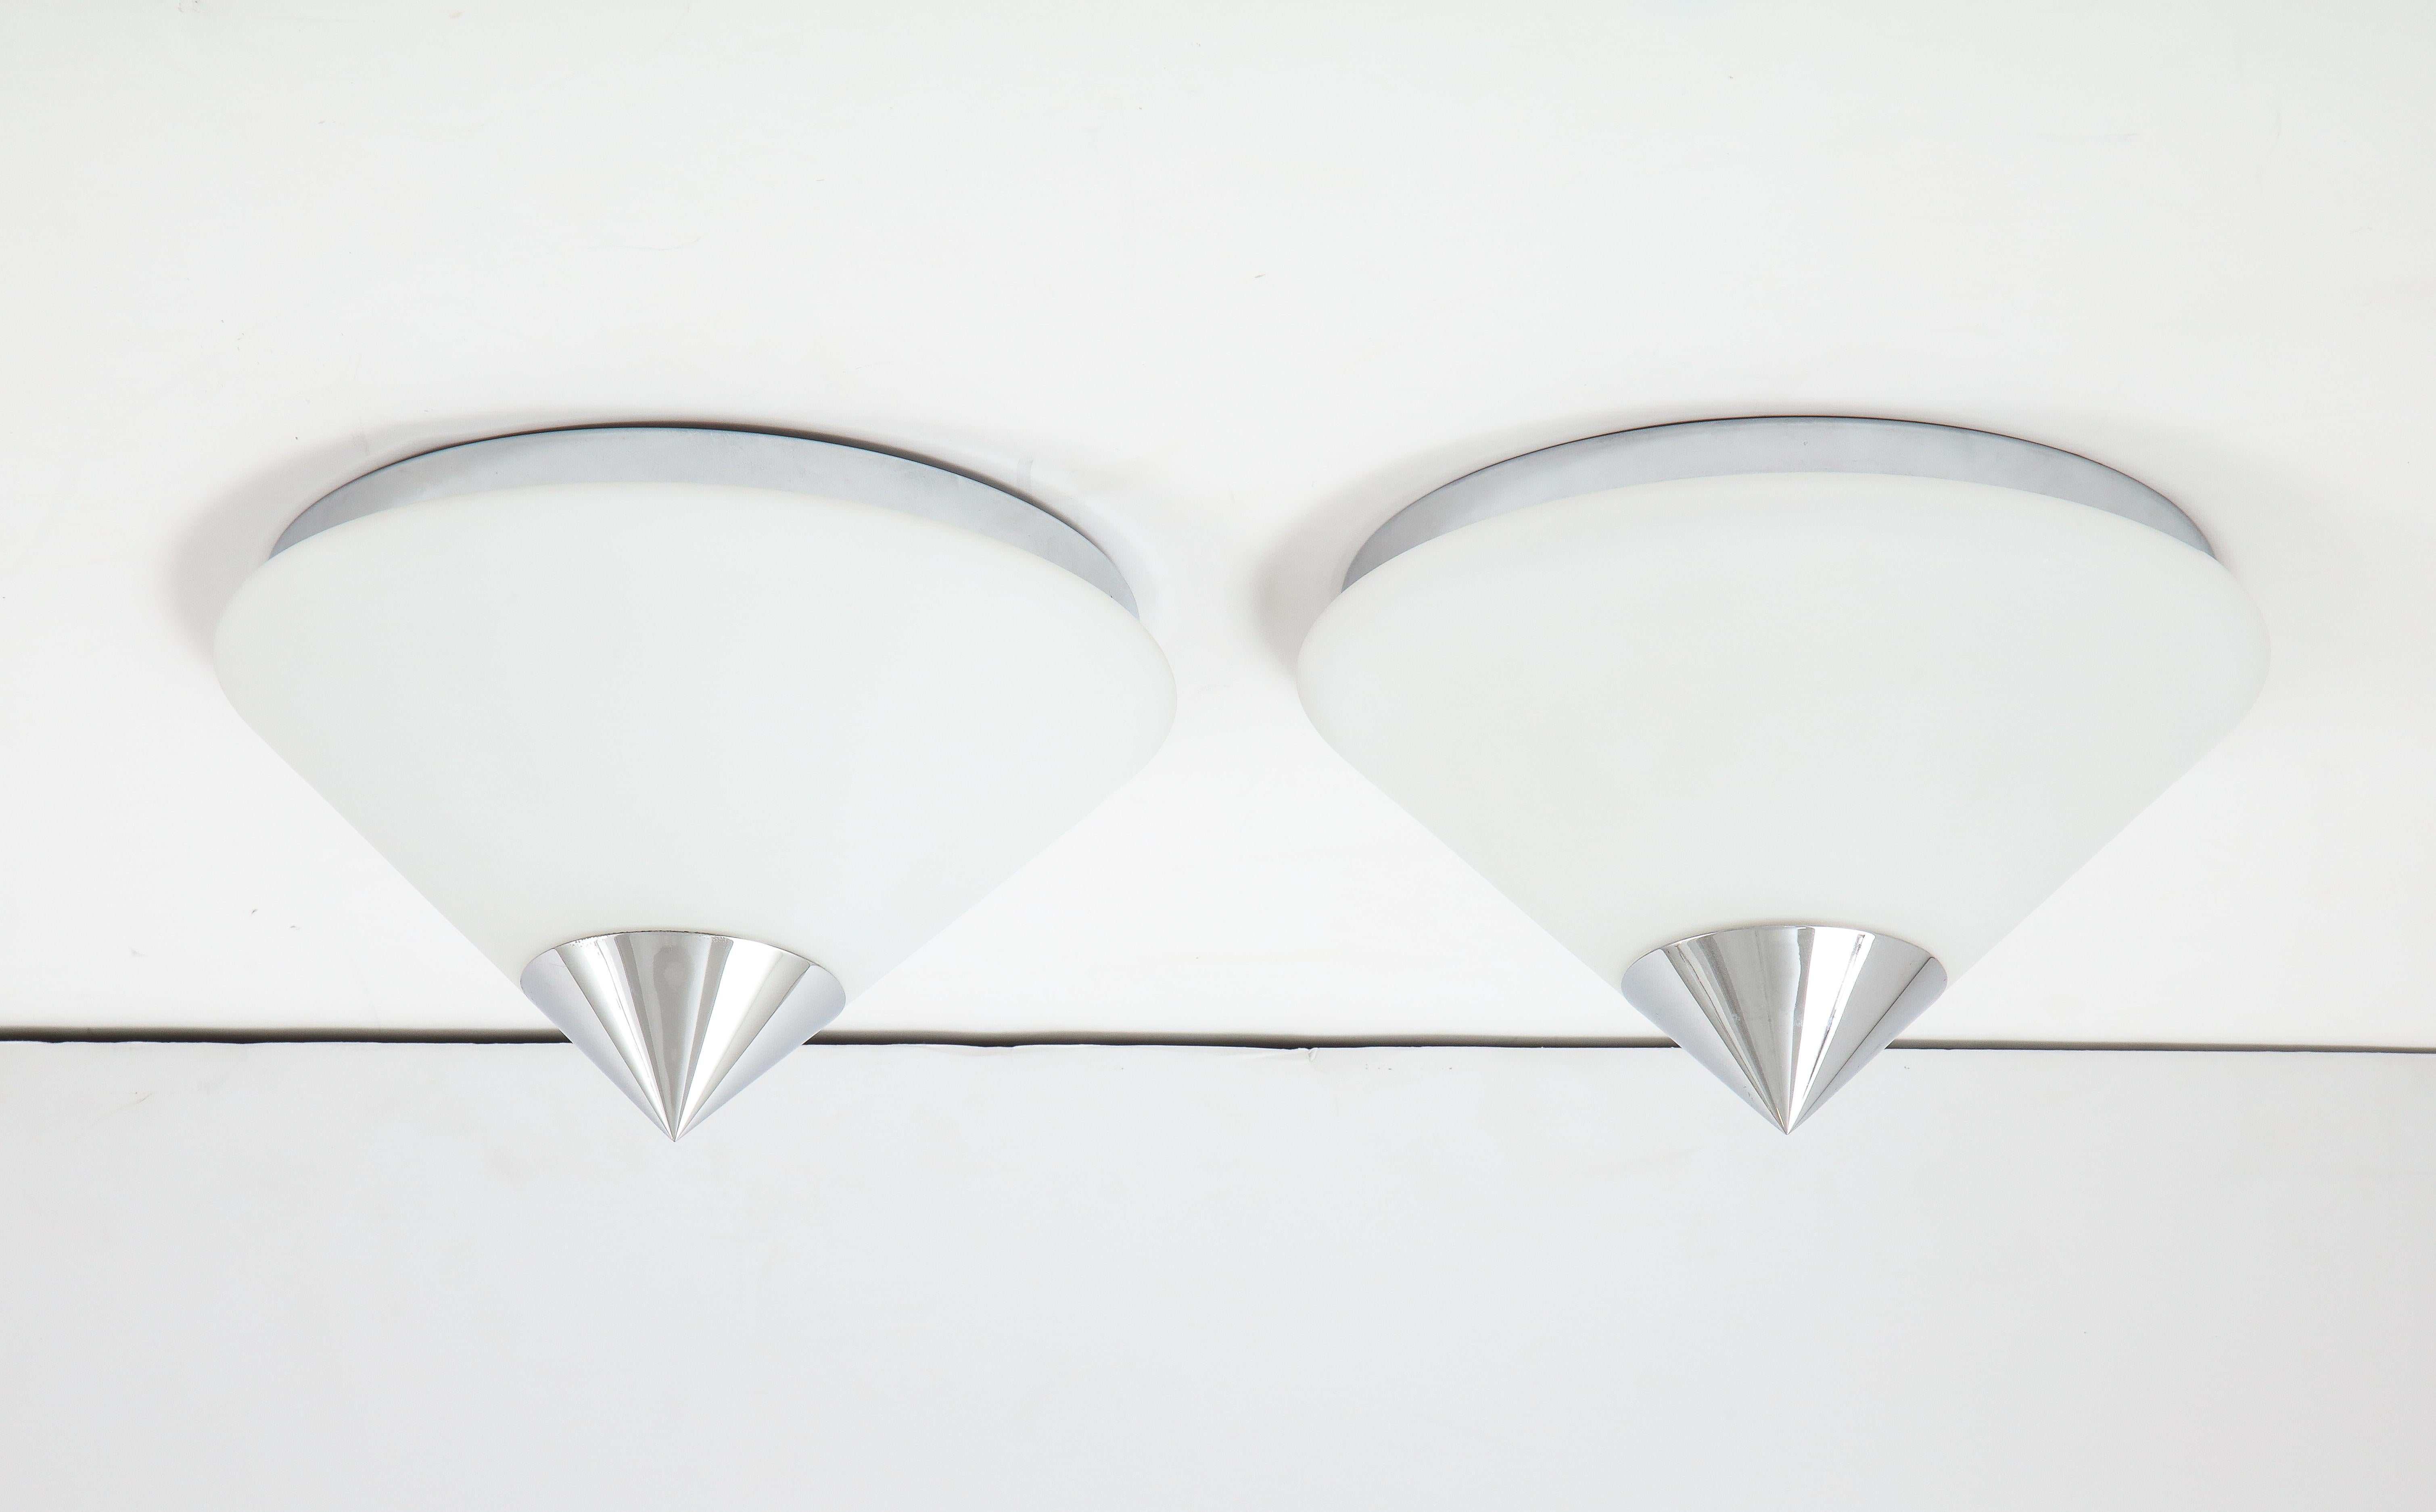 Pair of 1970s midcentury flush mounts /sconces by Limburg.
The large cone shaped Opaline glass shade is finished with a polished chrome cap sits on a
wall plate that has been Newly rewired for the US with a single light source MAX 60 watts.